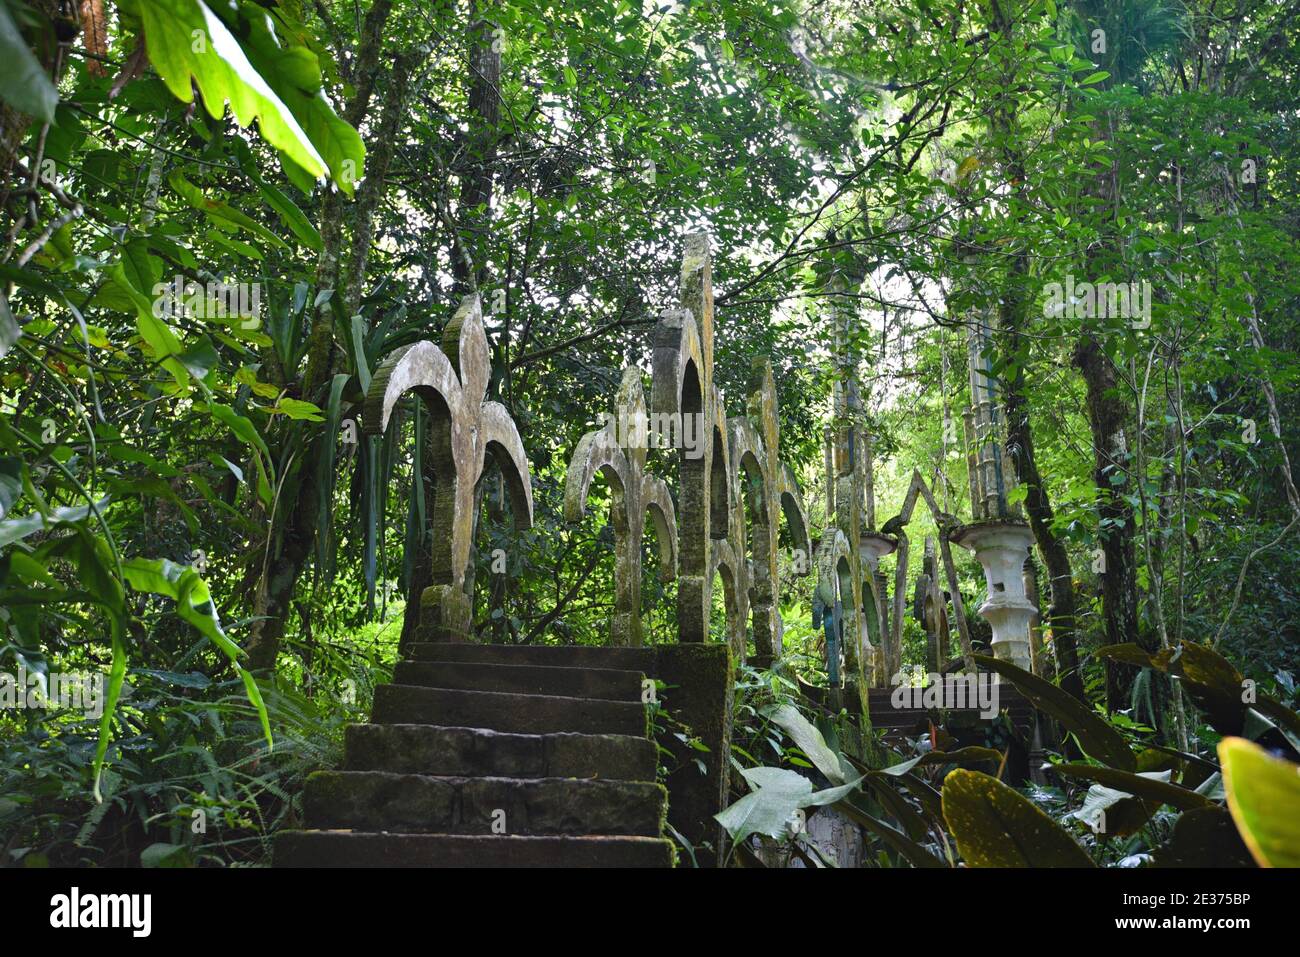 Panoramic view of the Pools, Las Pozas a surrealistic garden (Jardín surrealista) in the subtropical rain forest of the Sierra Madre mountains, Mexico. Stock Photo